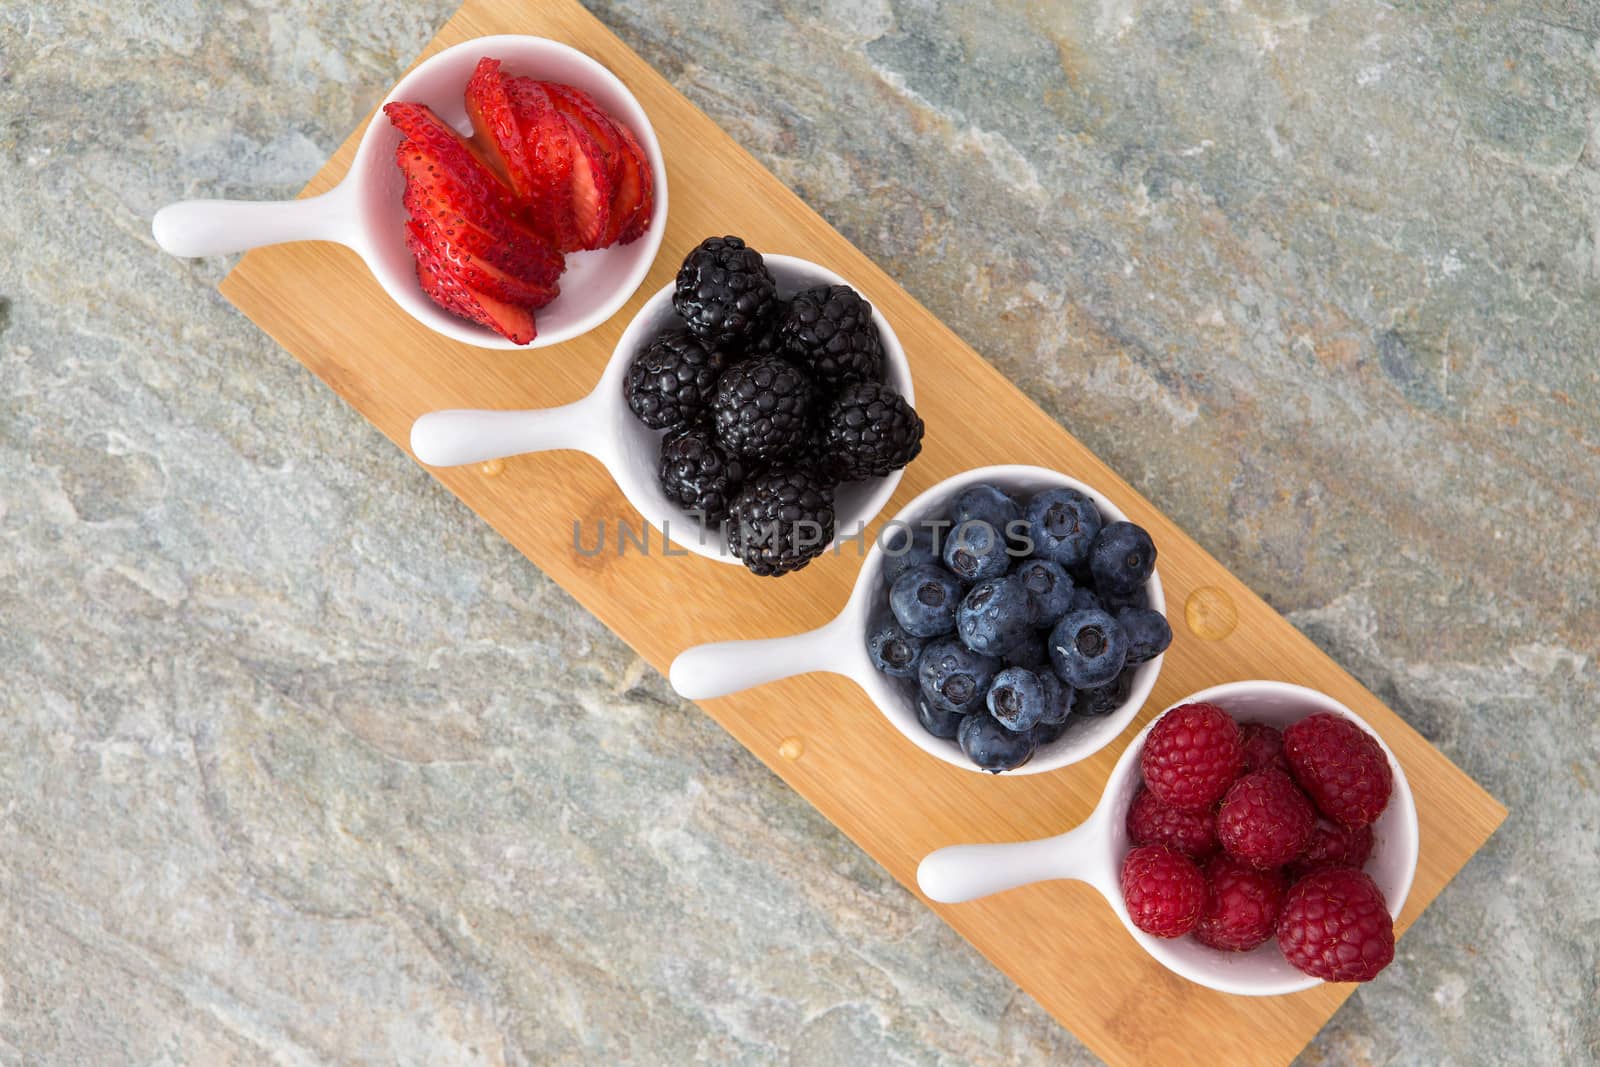 Dishes of fresh berries arranged diagonally on a small wooden board on a stone kitchen counter with copyspace ready for tasting and sampling these healthy autumn fruits